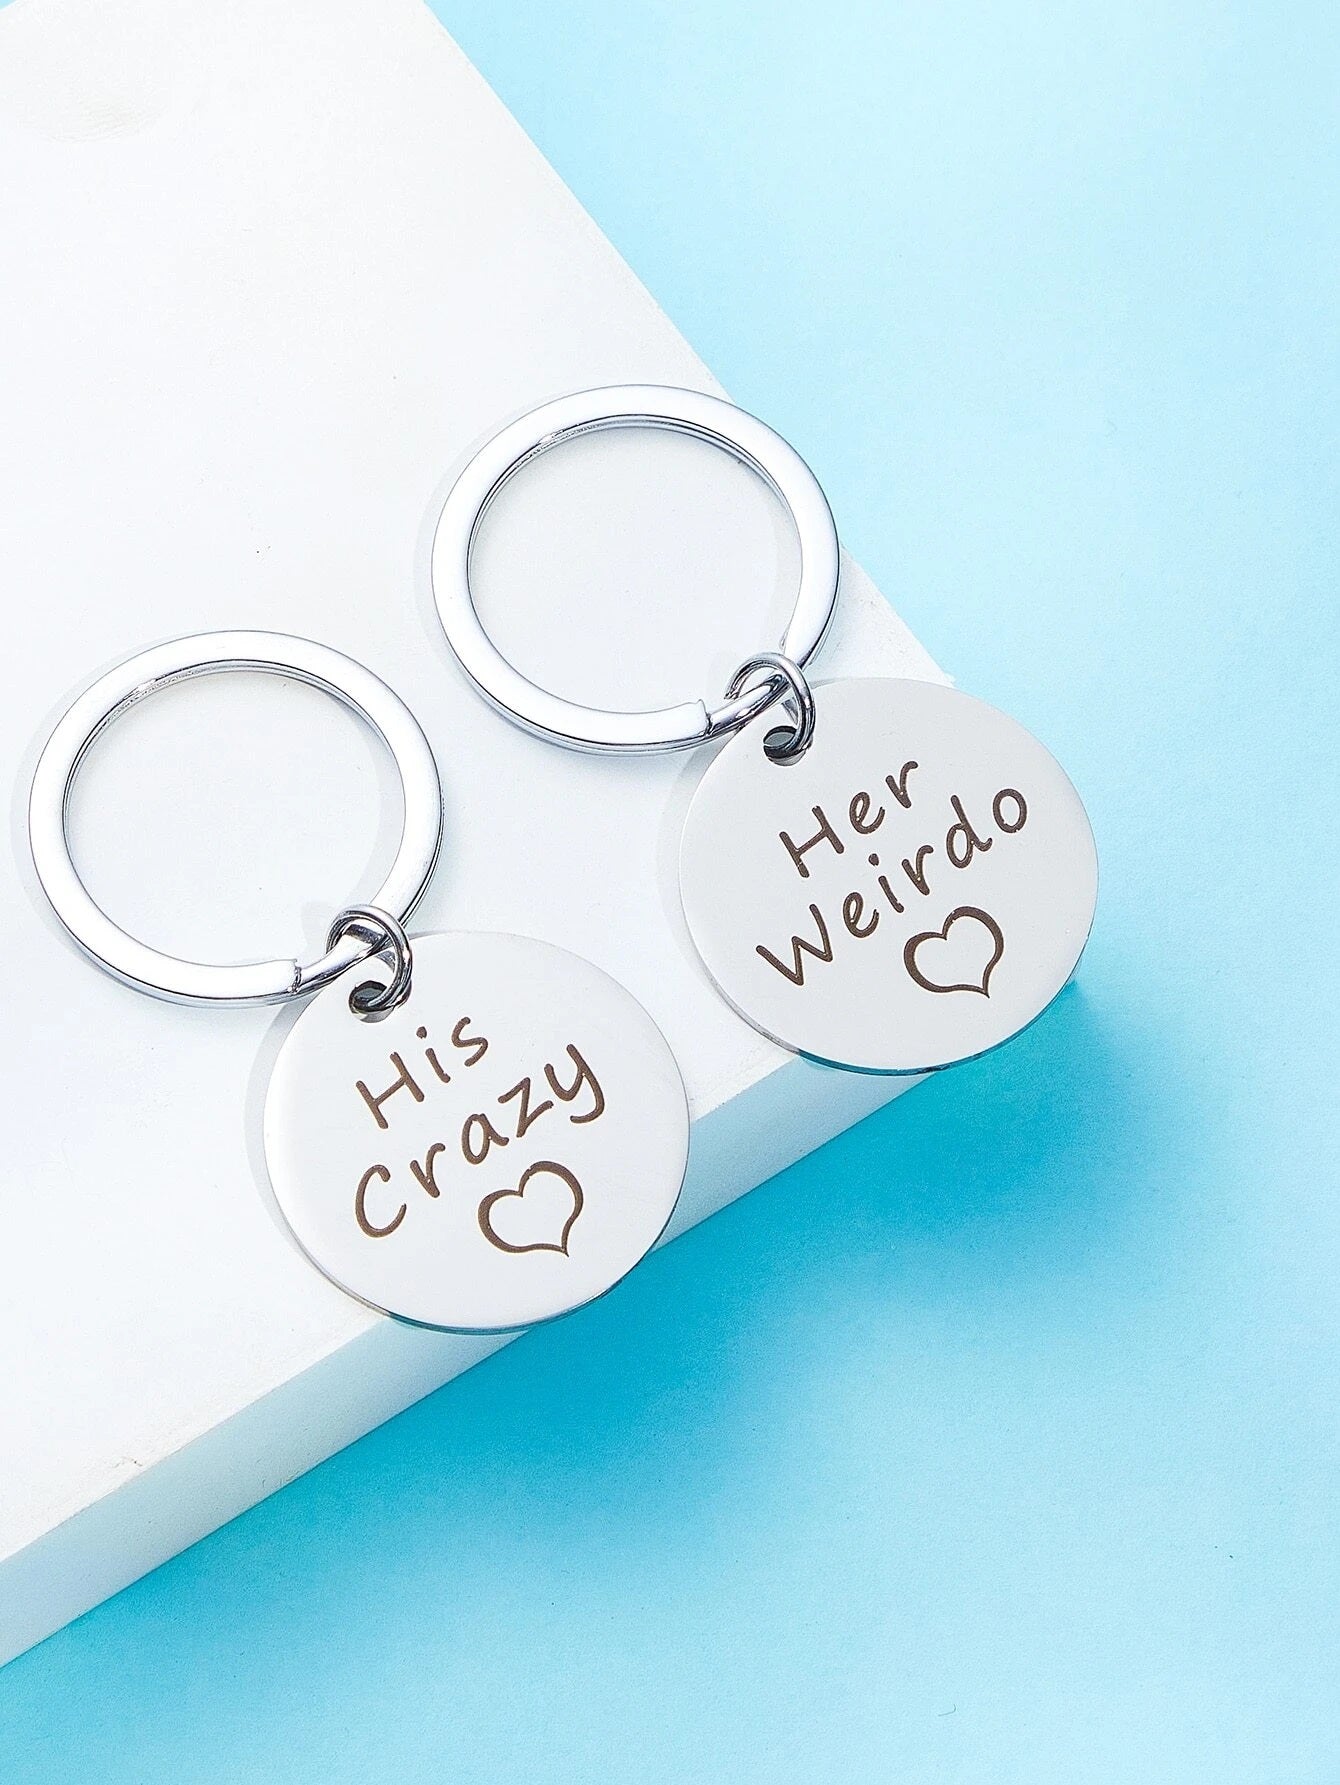 His Crazy & Her Weirdo Couples Keychains